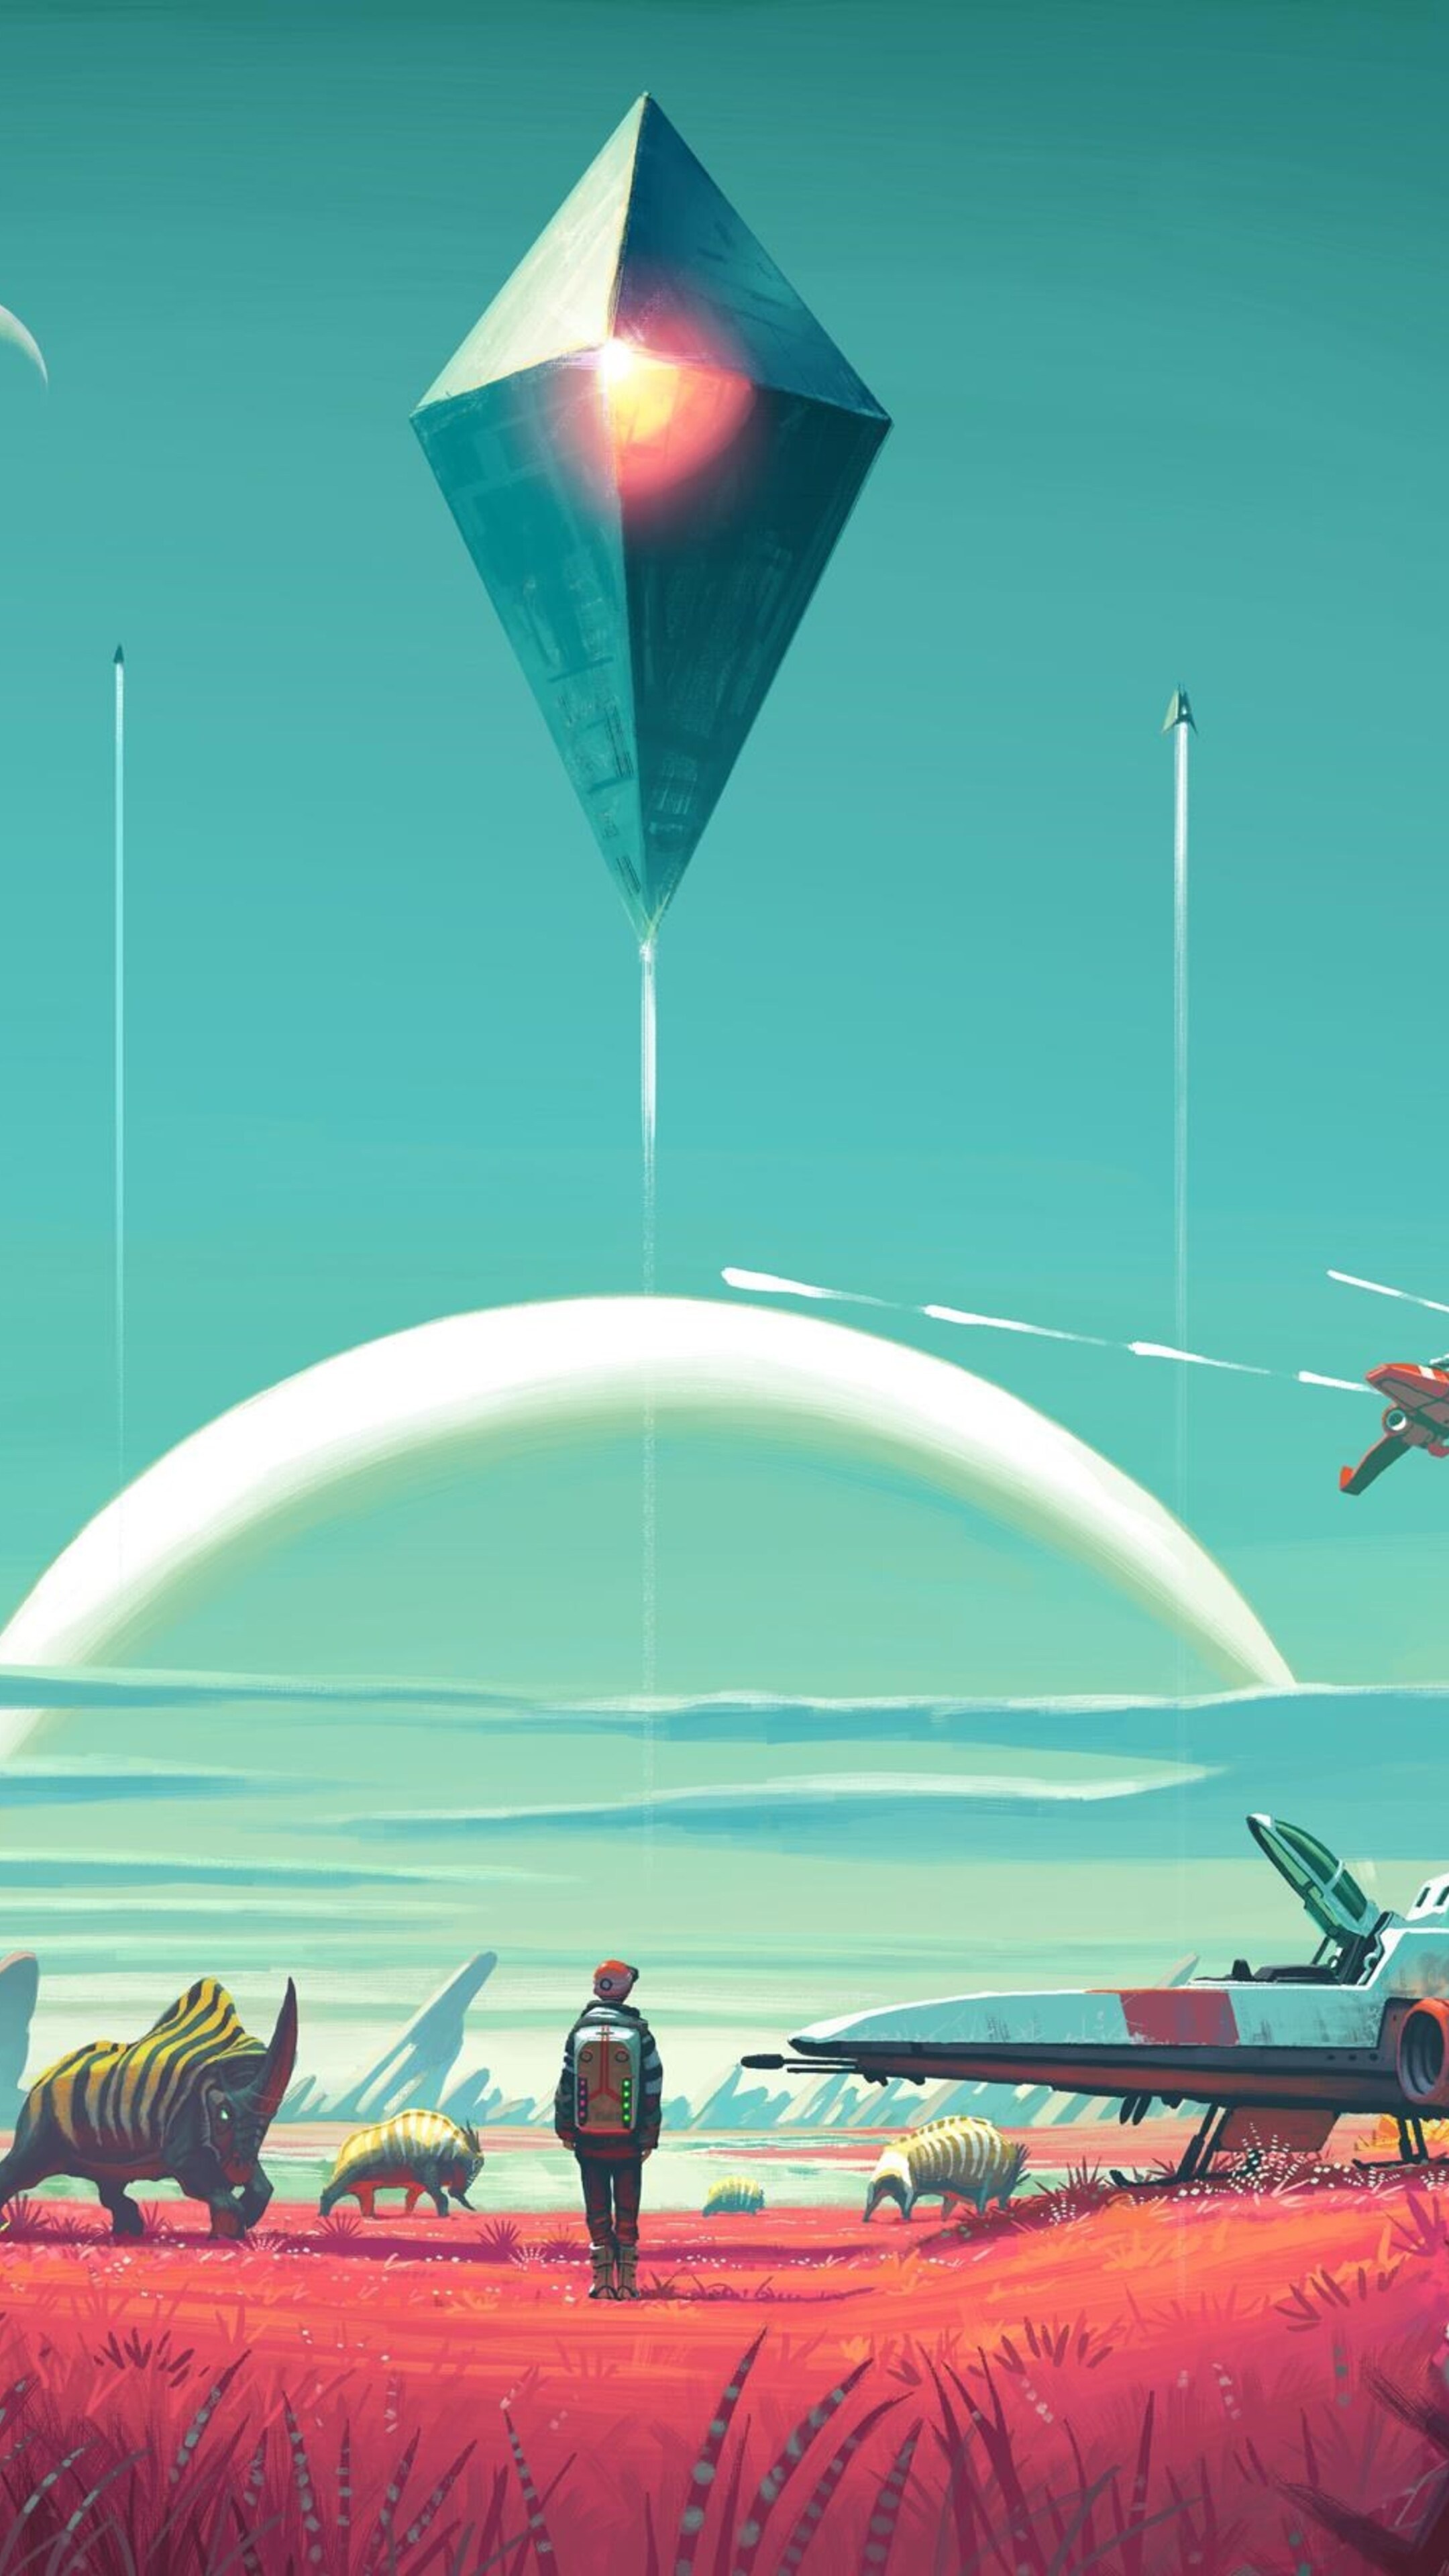 No Man's Sky on Sony Xperia, HD gaming wallpapers, Game on mobile, Premium resolution, 2160x3840 4K Handy